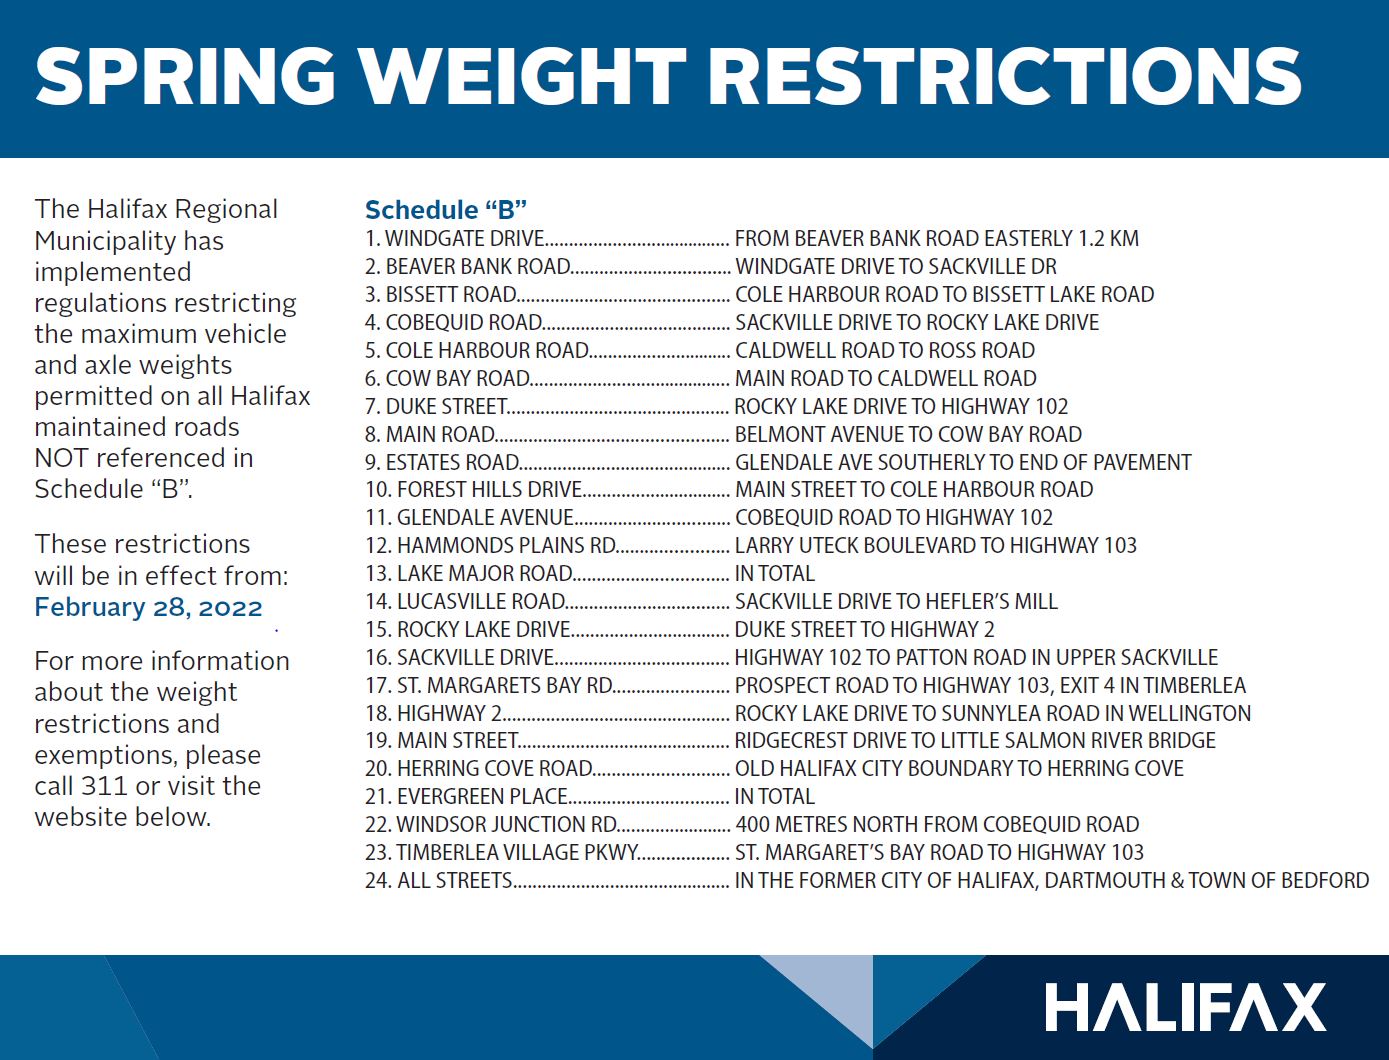 A list of roads impacted by spring weight restrictions